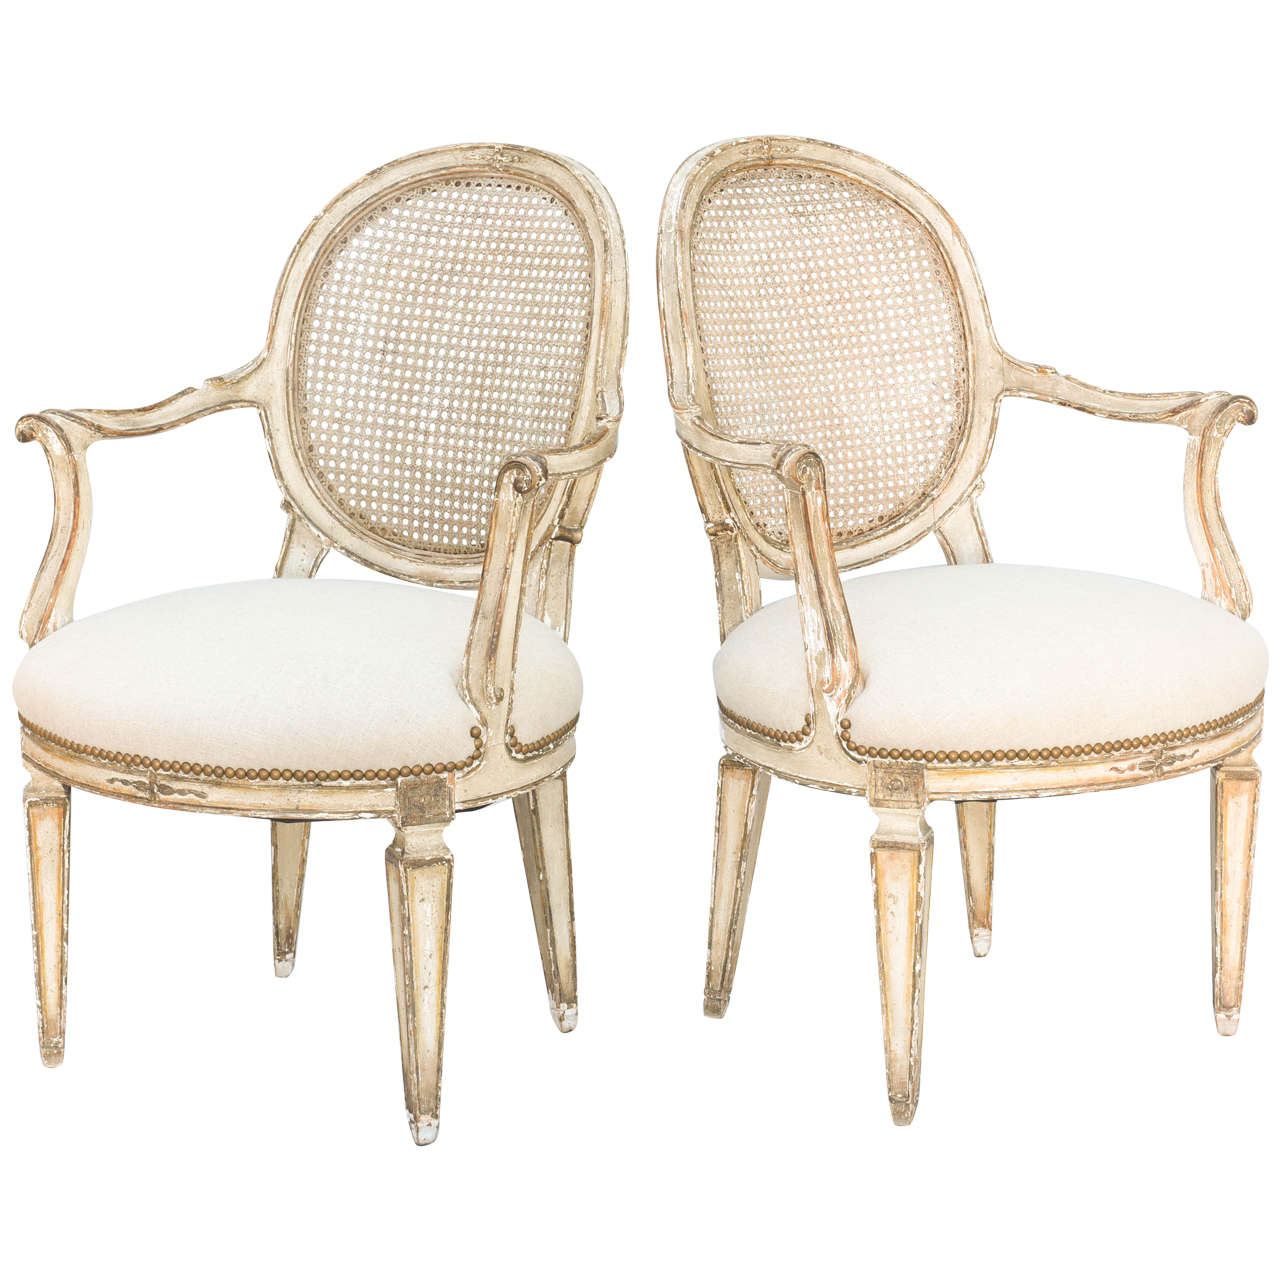 Pair of 19th Century Painted and Parcel Gilt Fauteuils For Sale